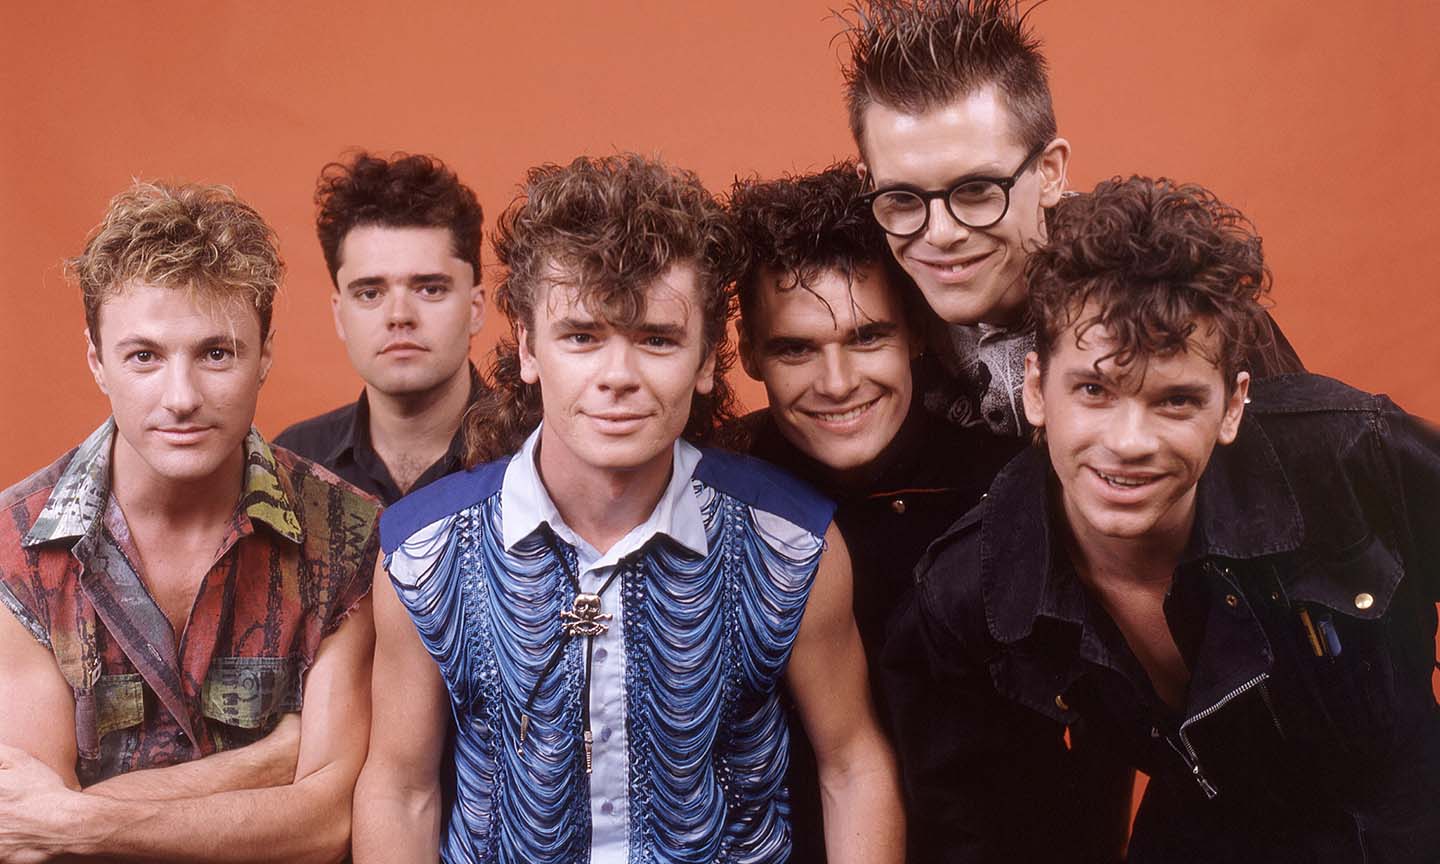 https://www.udiscovermusic.com/wp-content/uploads/2022/04/INXS-GettyImages-82256616.jpg